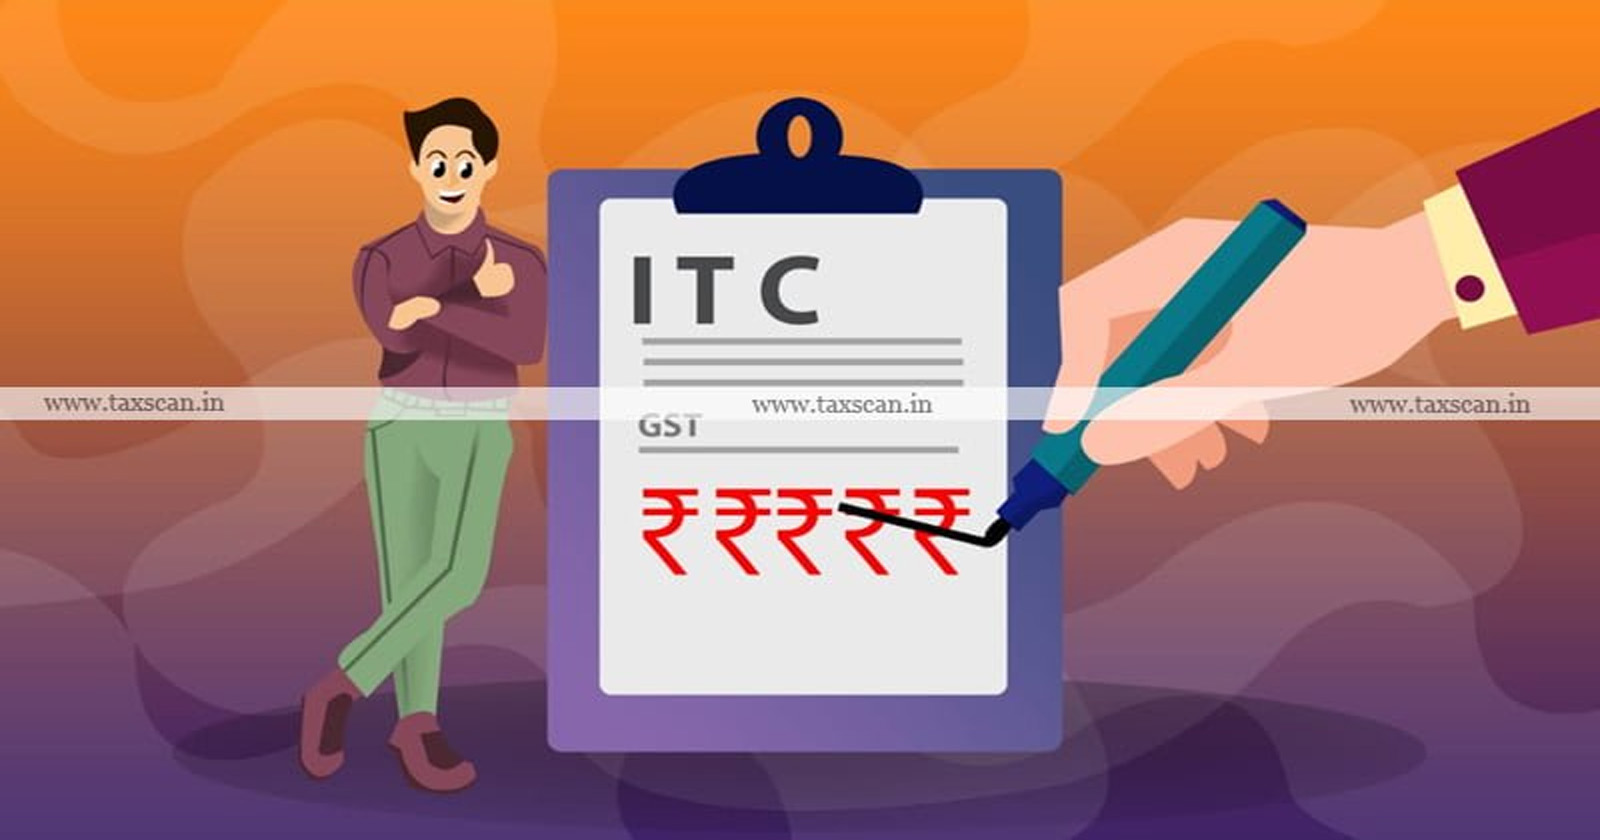 ITC - Supplying -Dealer - Paid - Government-despite- Collection - Tax - Purchasing-Dealer-Patna-HC-TAXSCAN